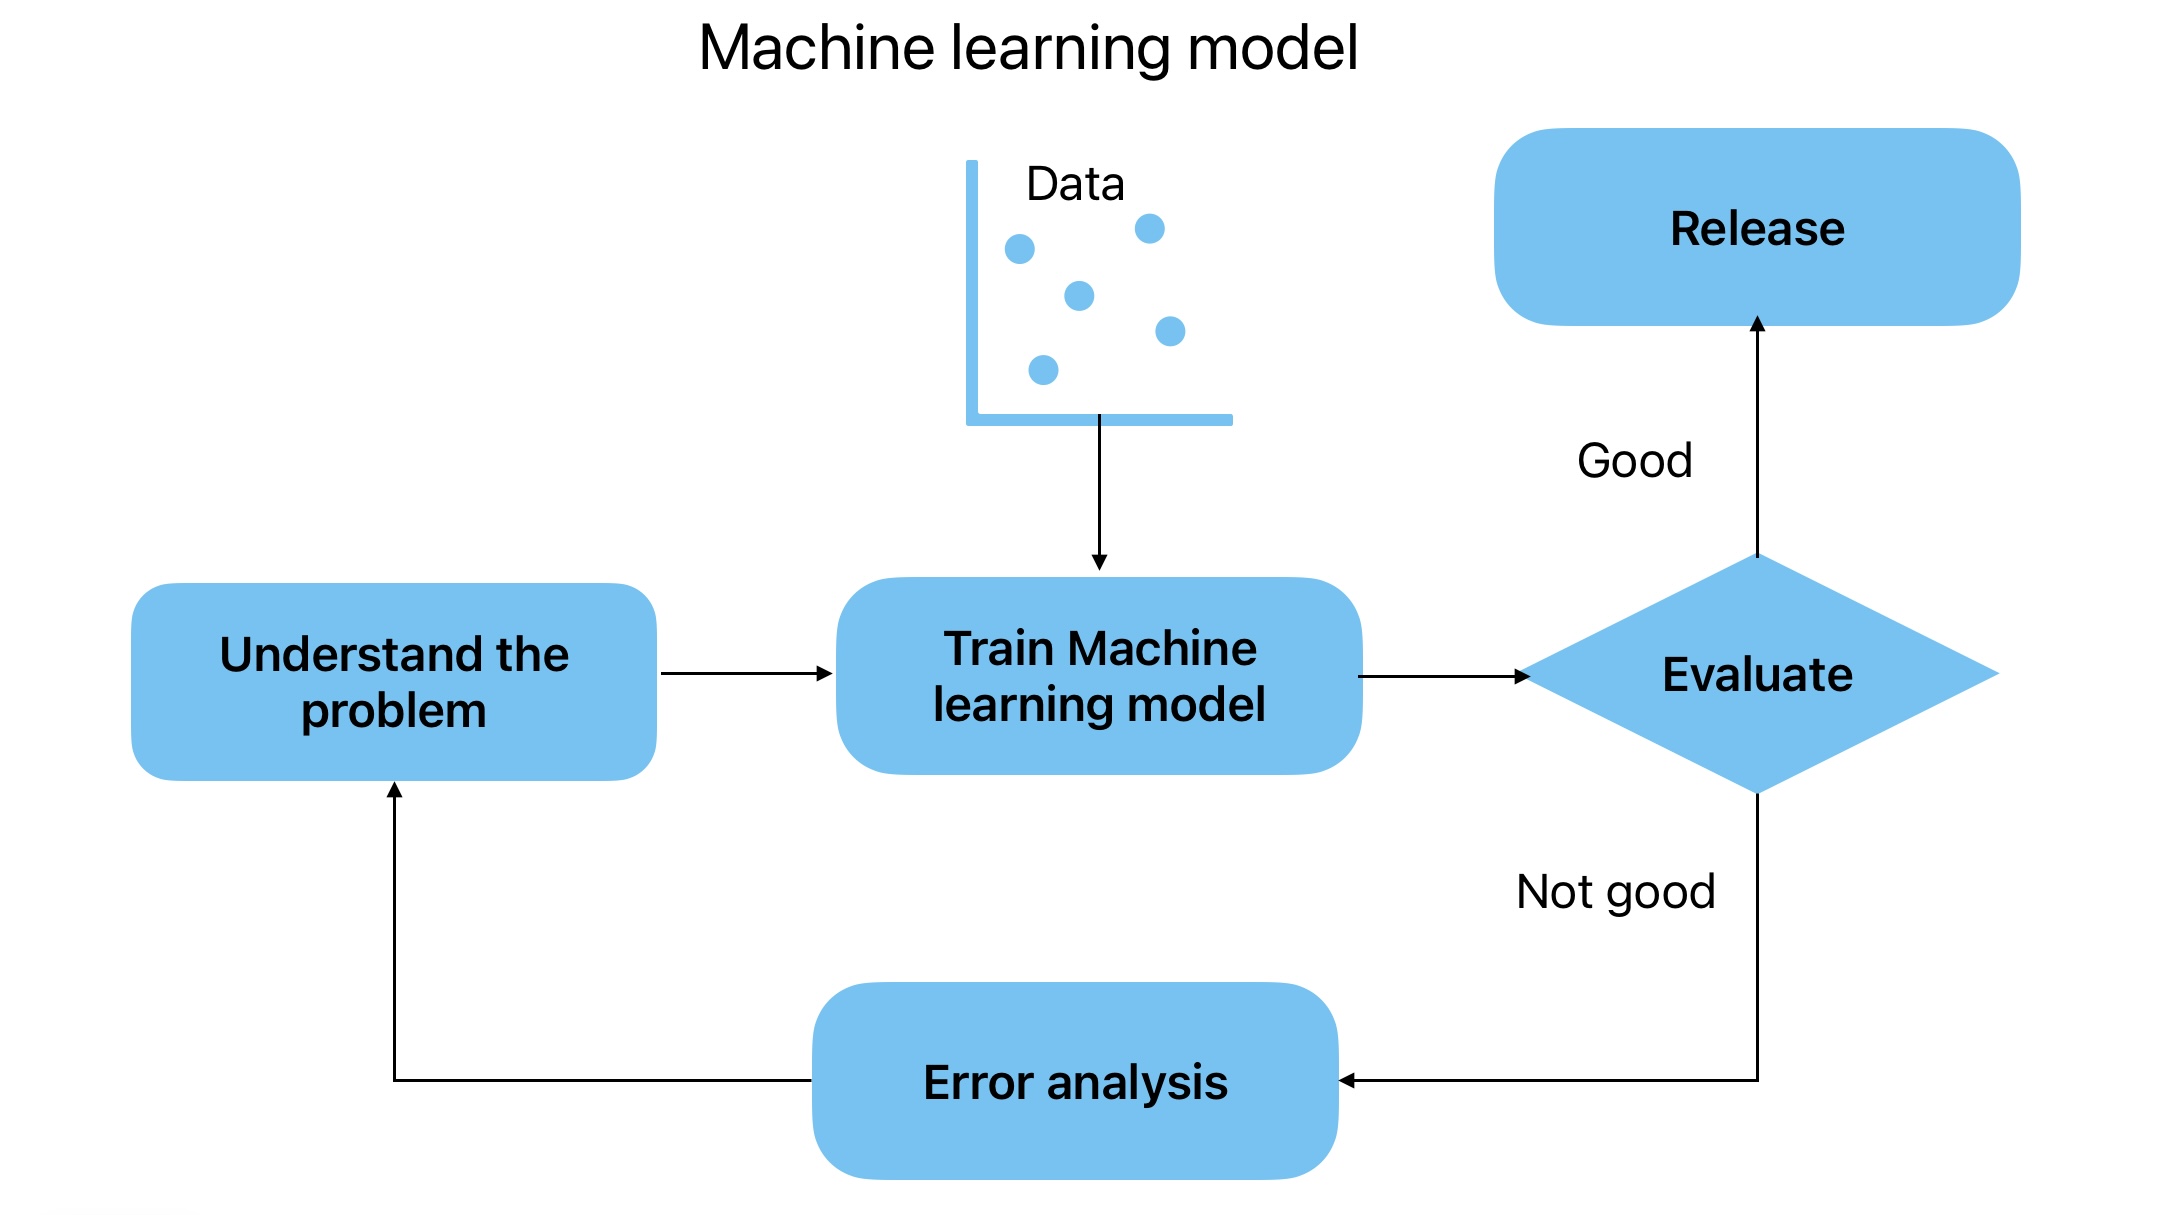 This image shows the workflow for machine learning algorithms.